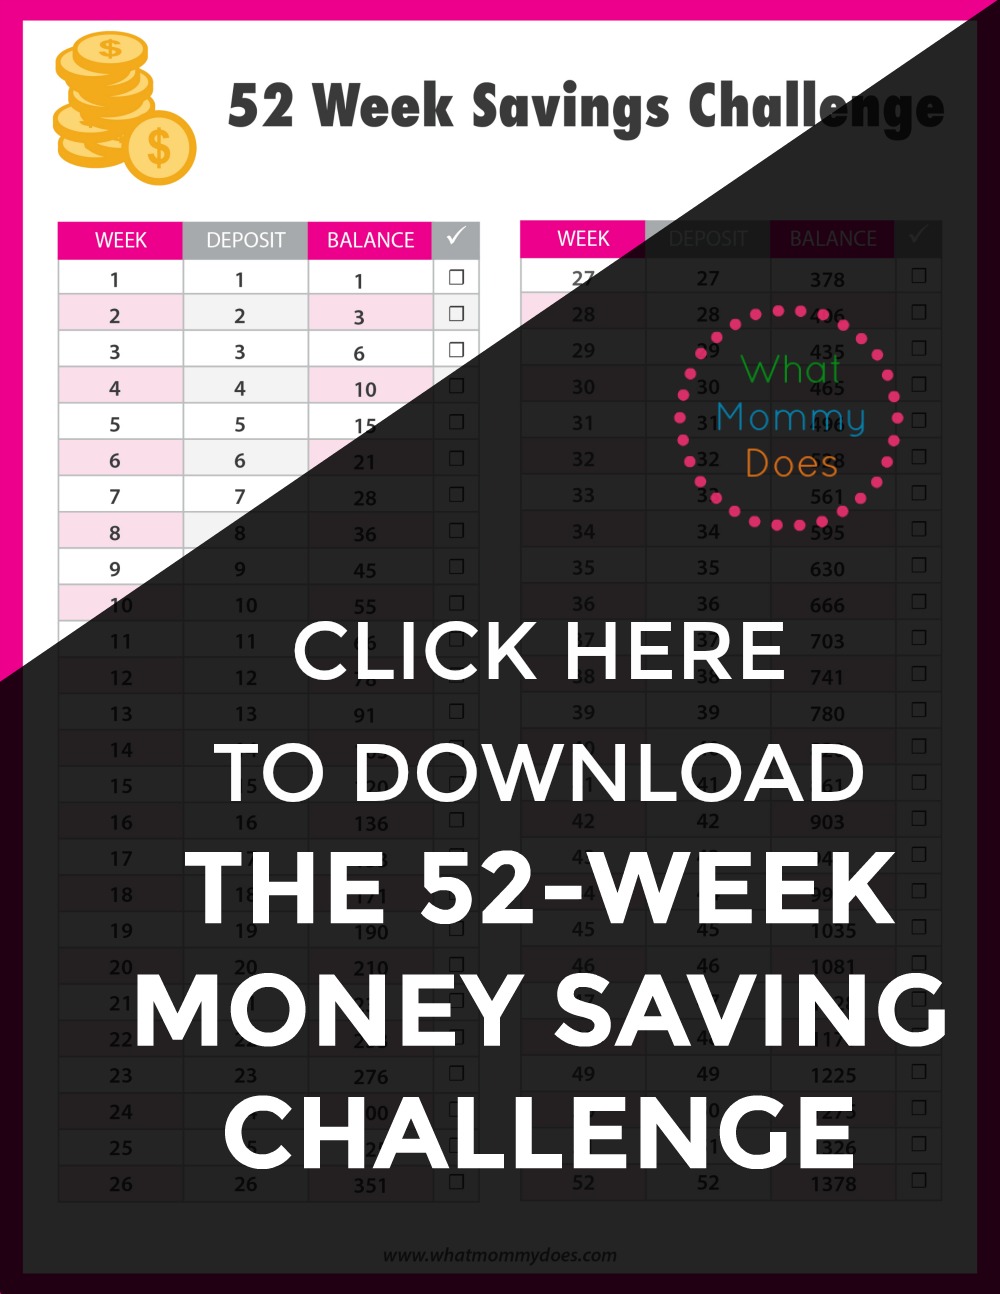 I love 52 week challenges like this! Saving money is sooooo boring but when I can wrap a challenge around it, it's so much easier! I like how this starts with a simple goal of $1 and only ever gets up to $52. SO. DOABLE. | 52 week money savings challenge chart, 2017 budgeting ideas, fun savings plans